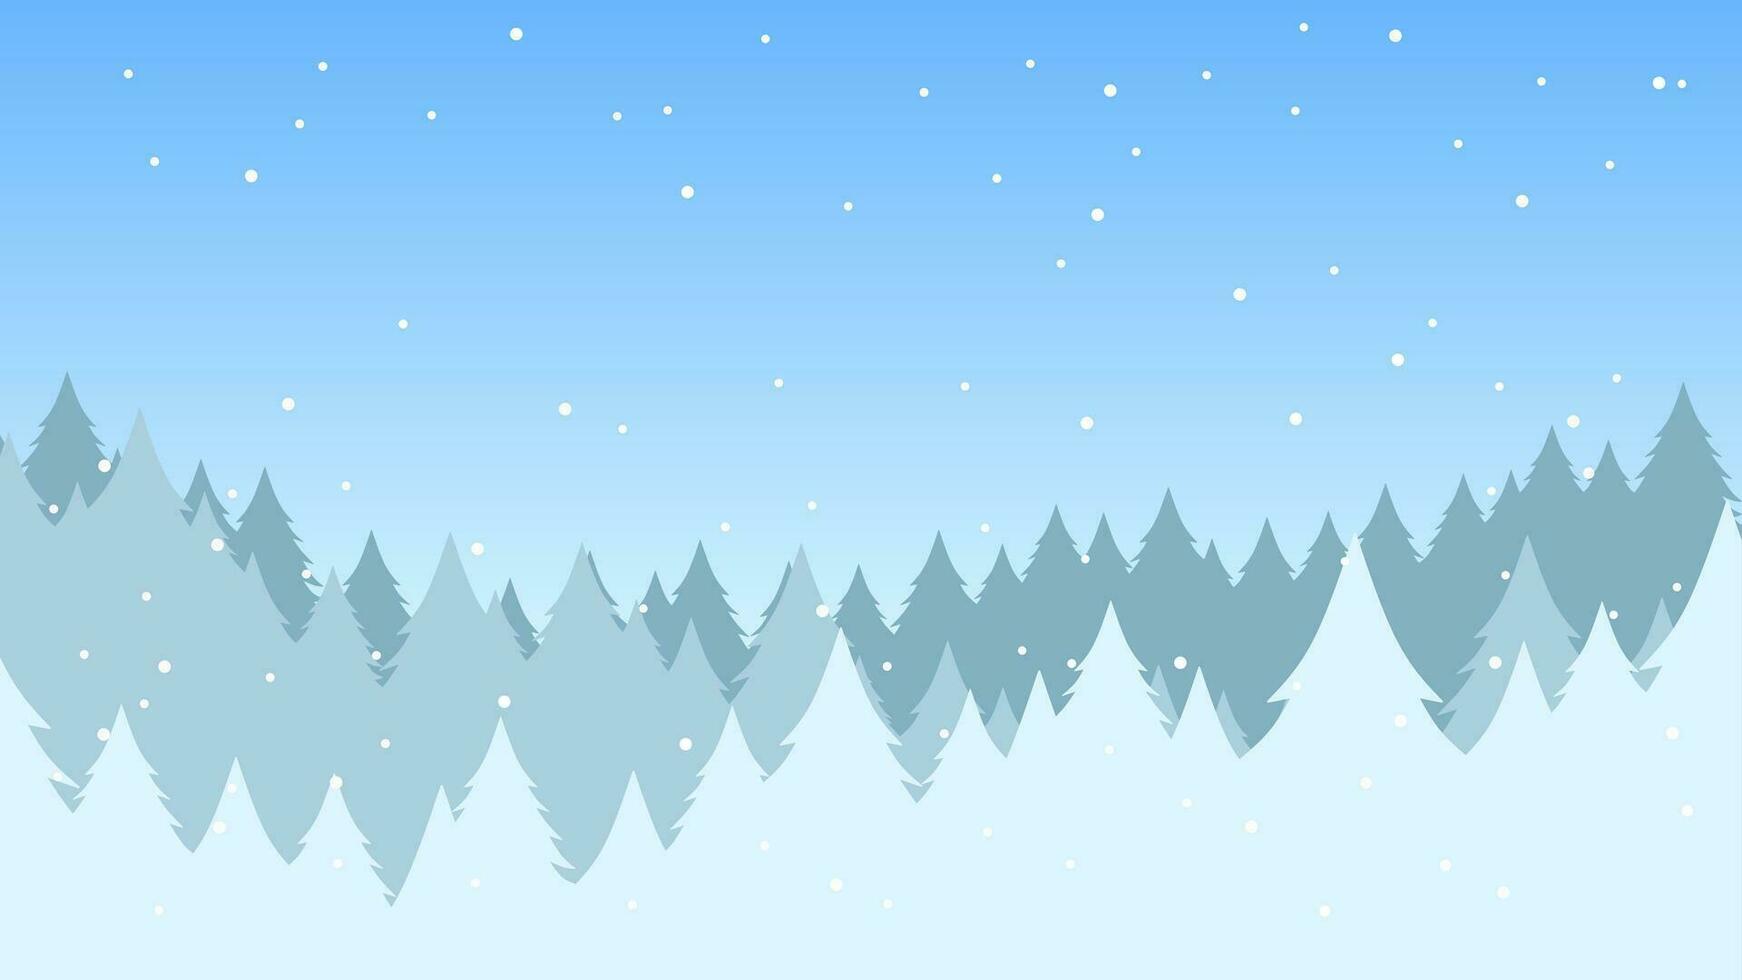 Winter pine forest landscape vector illustration. Silhouette of snow covered coniferous in cold season. Pine forest landscape for background, wallpaper or landing page